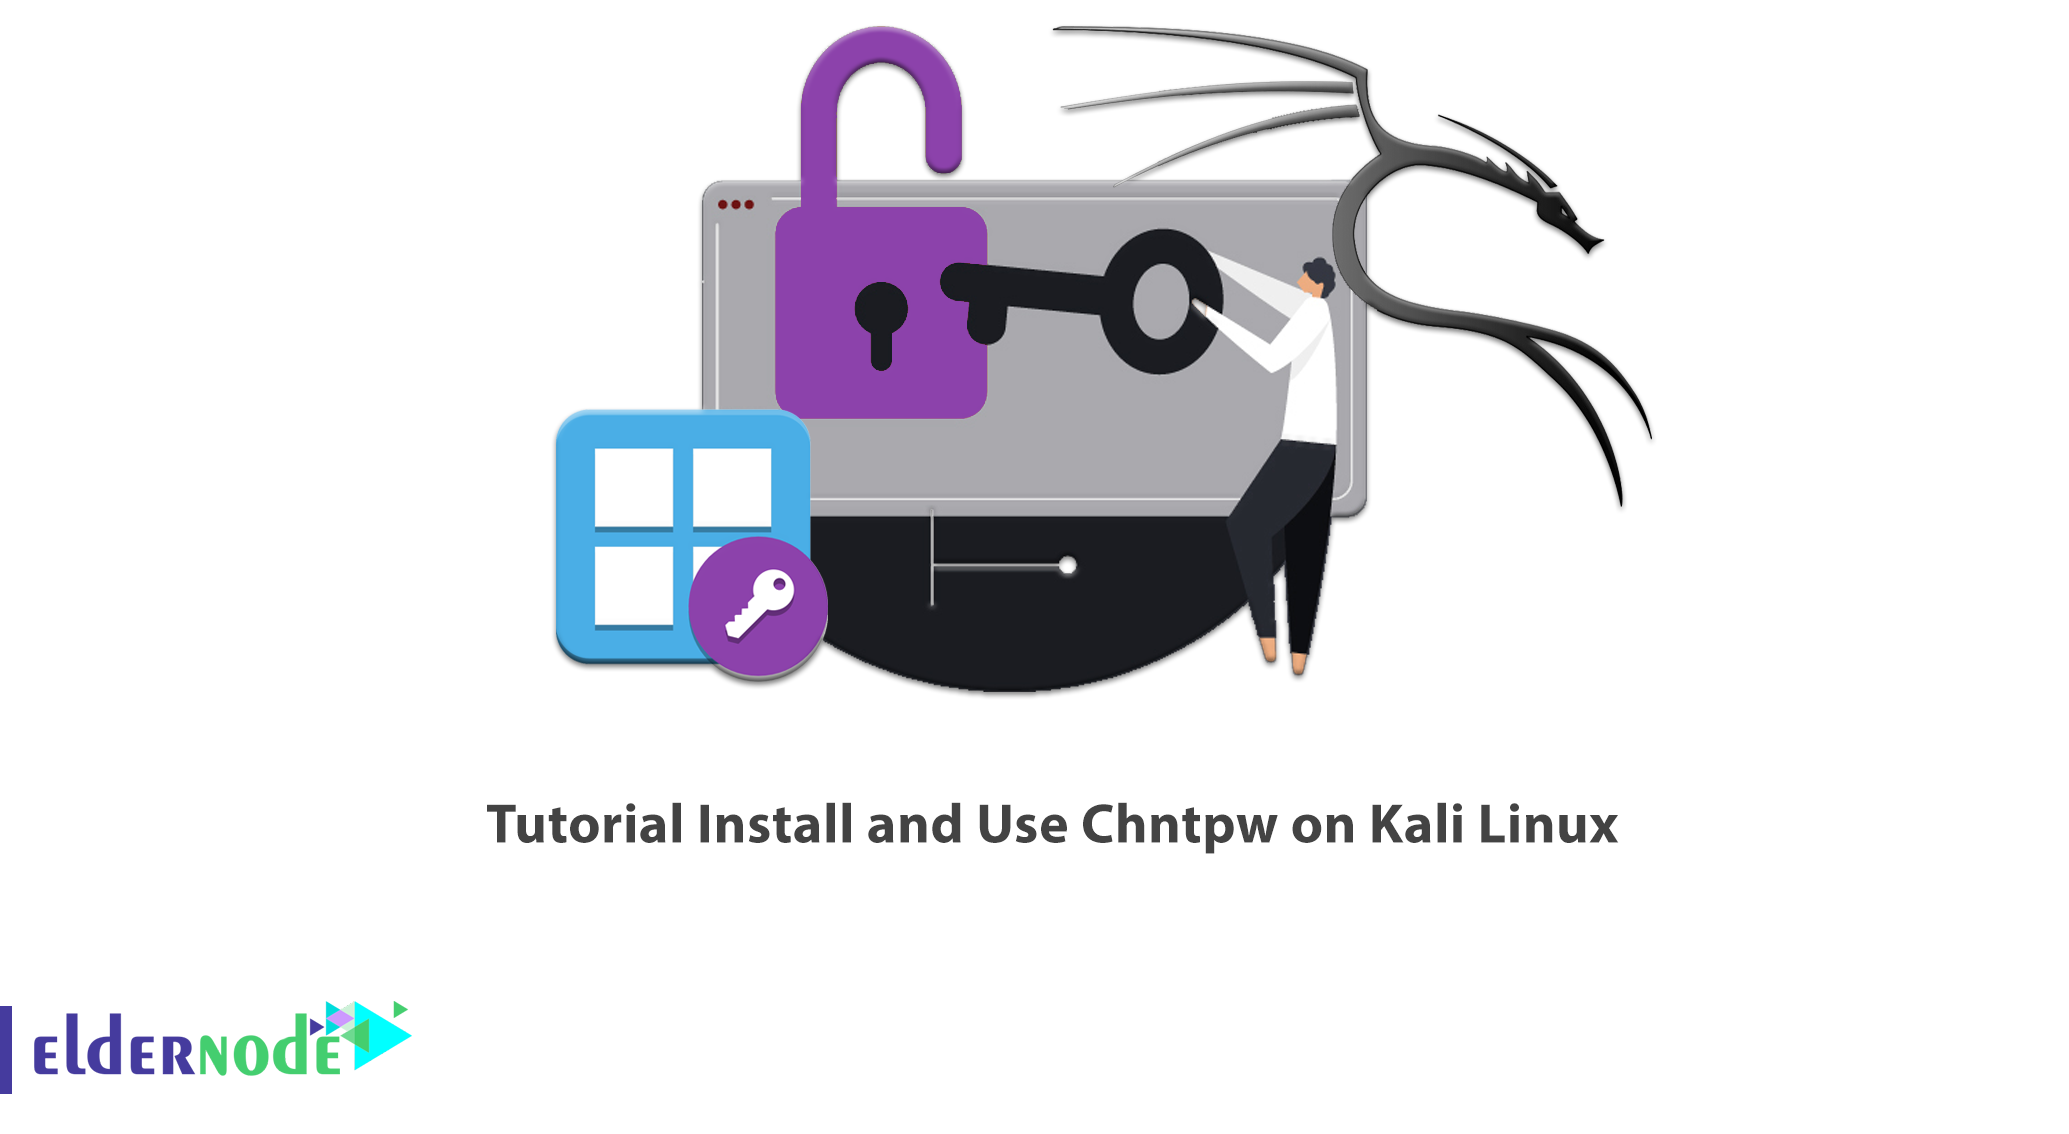 Tutorial-Install-and-Use-Chntpw-on-Kali-Linux